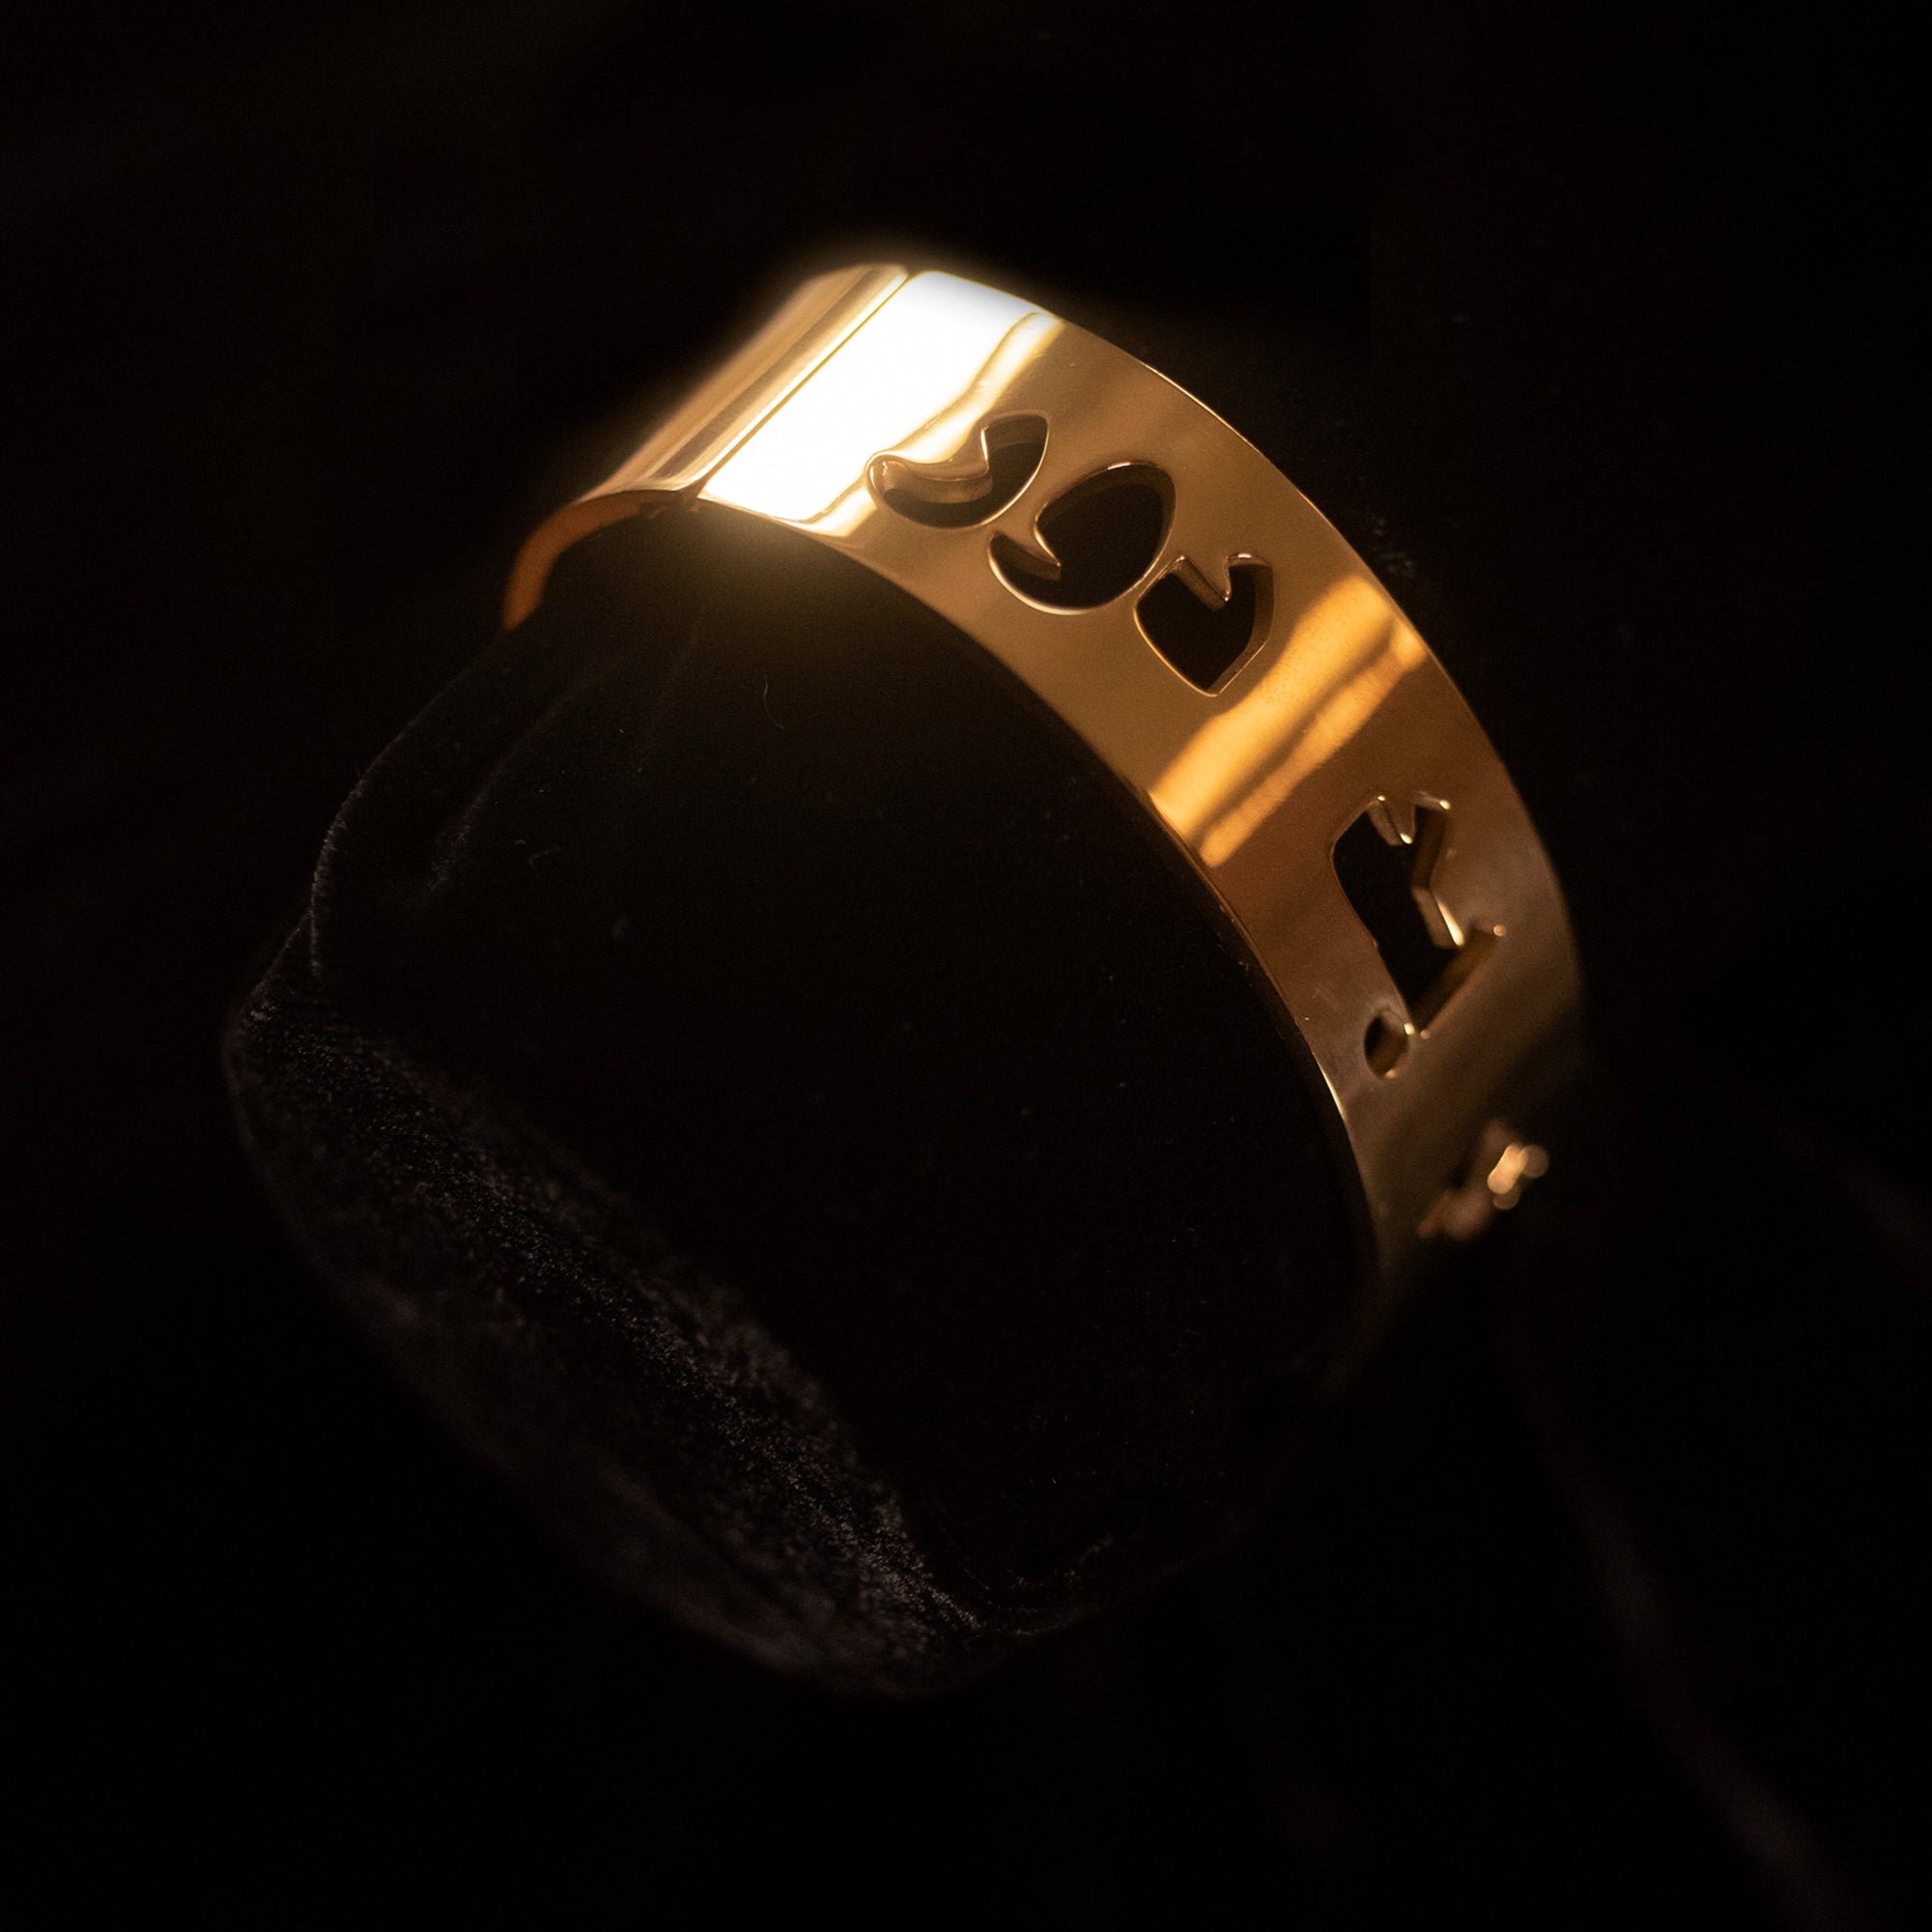 A gold bangle against a black background that says Chishme Badh Door in Dari.